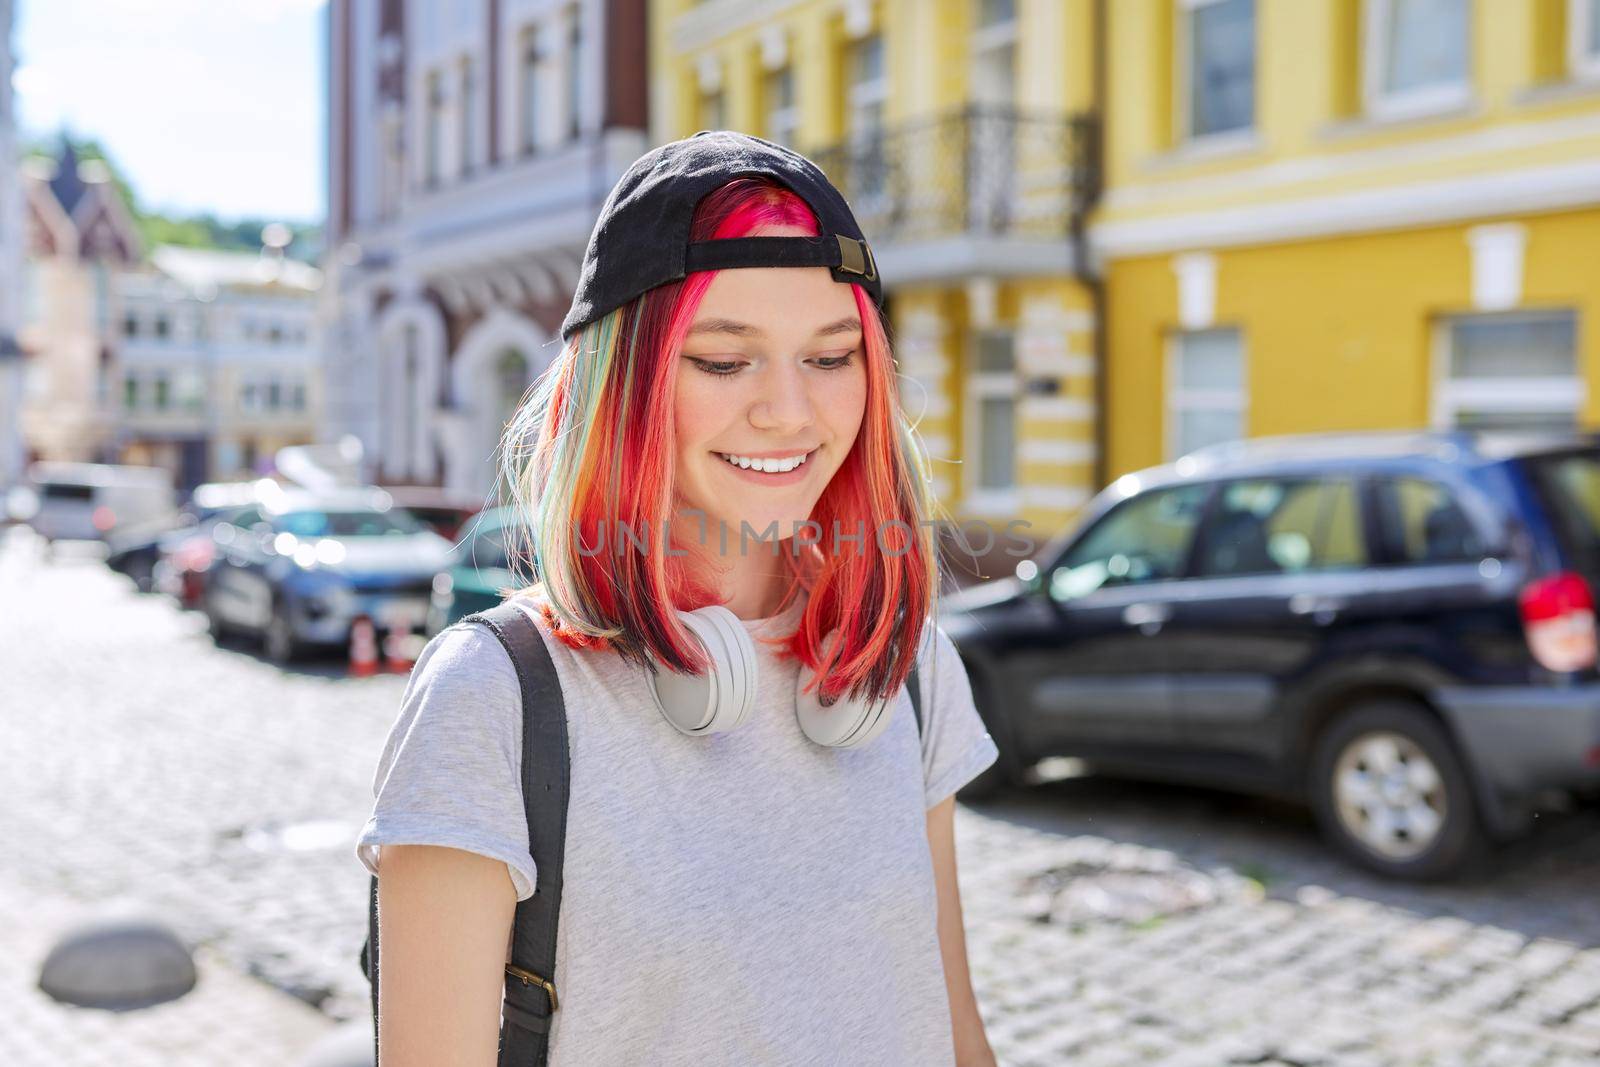 Outdoor urban portrait of a trending female teenager in a cap with a backpack with colored dyed hair. Youth, lifestyle, fashion, urban style, people concept